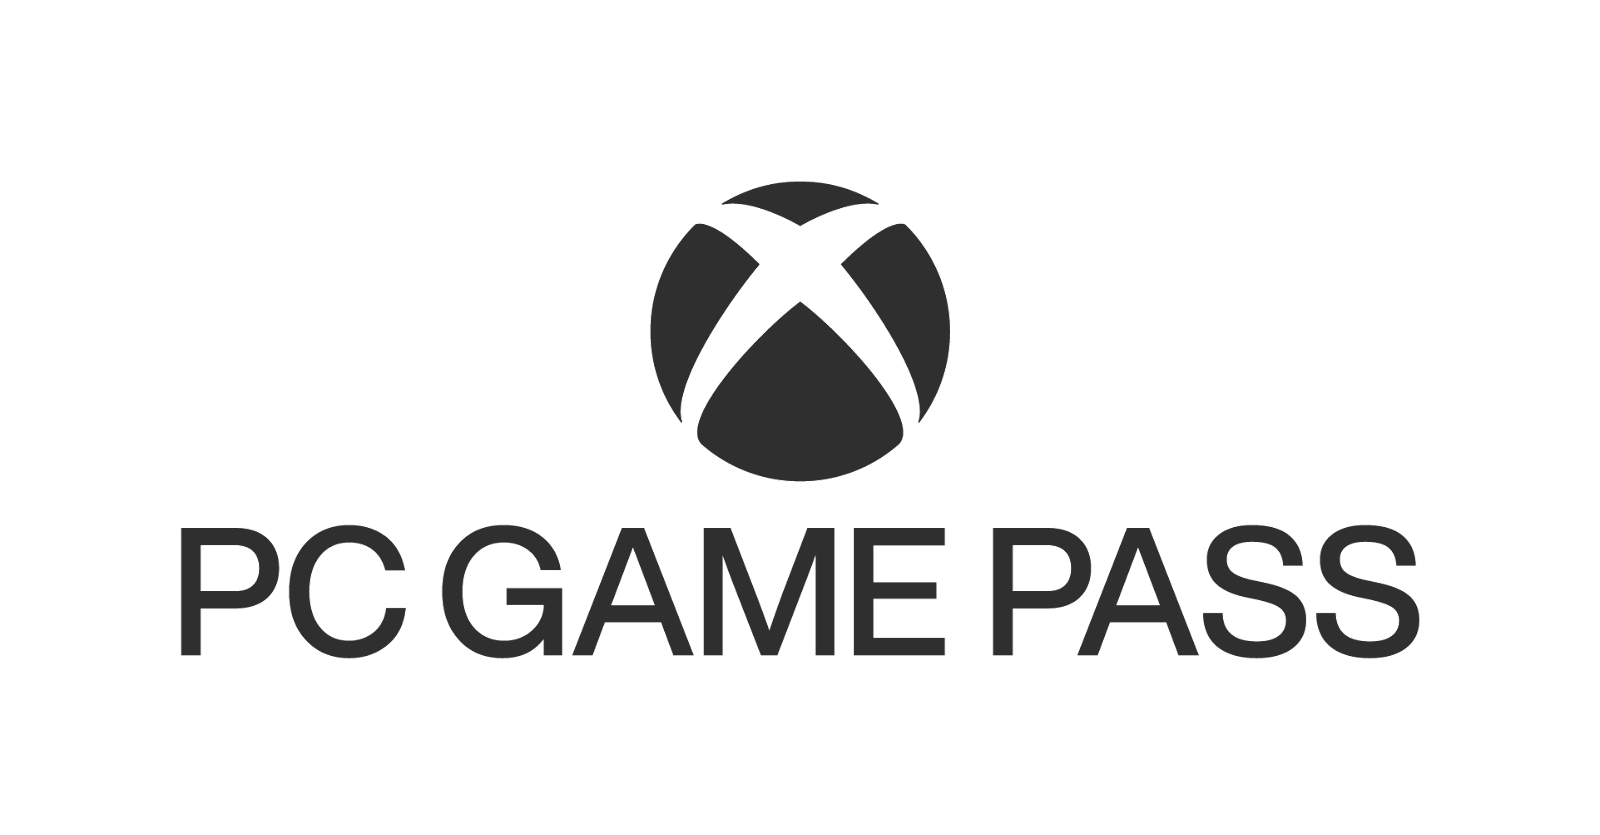 Claim 1 Month FREE PC GAME PASS  Discord Giveaway Guide 